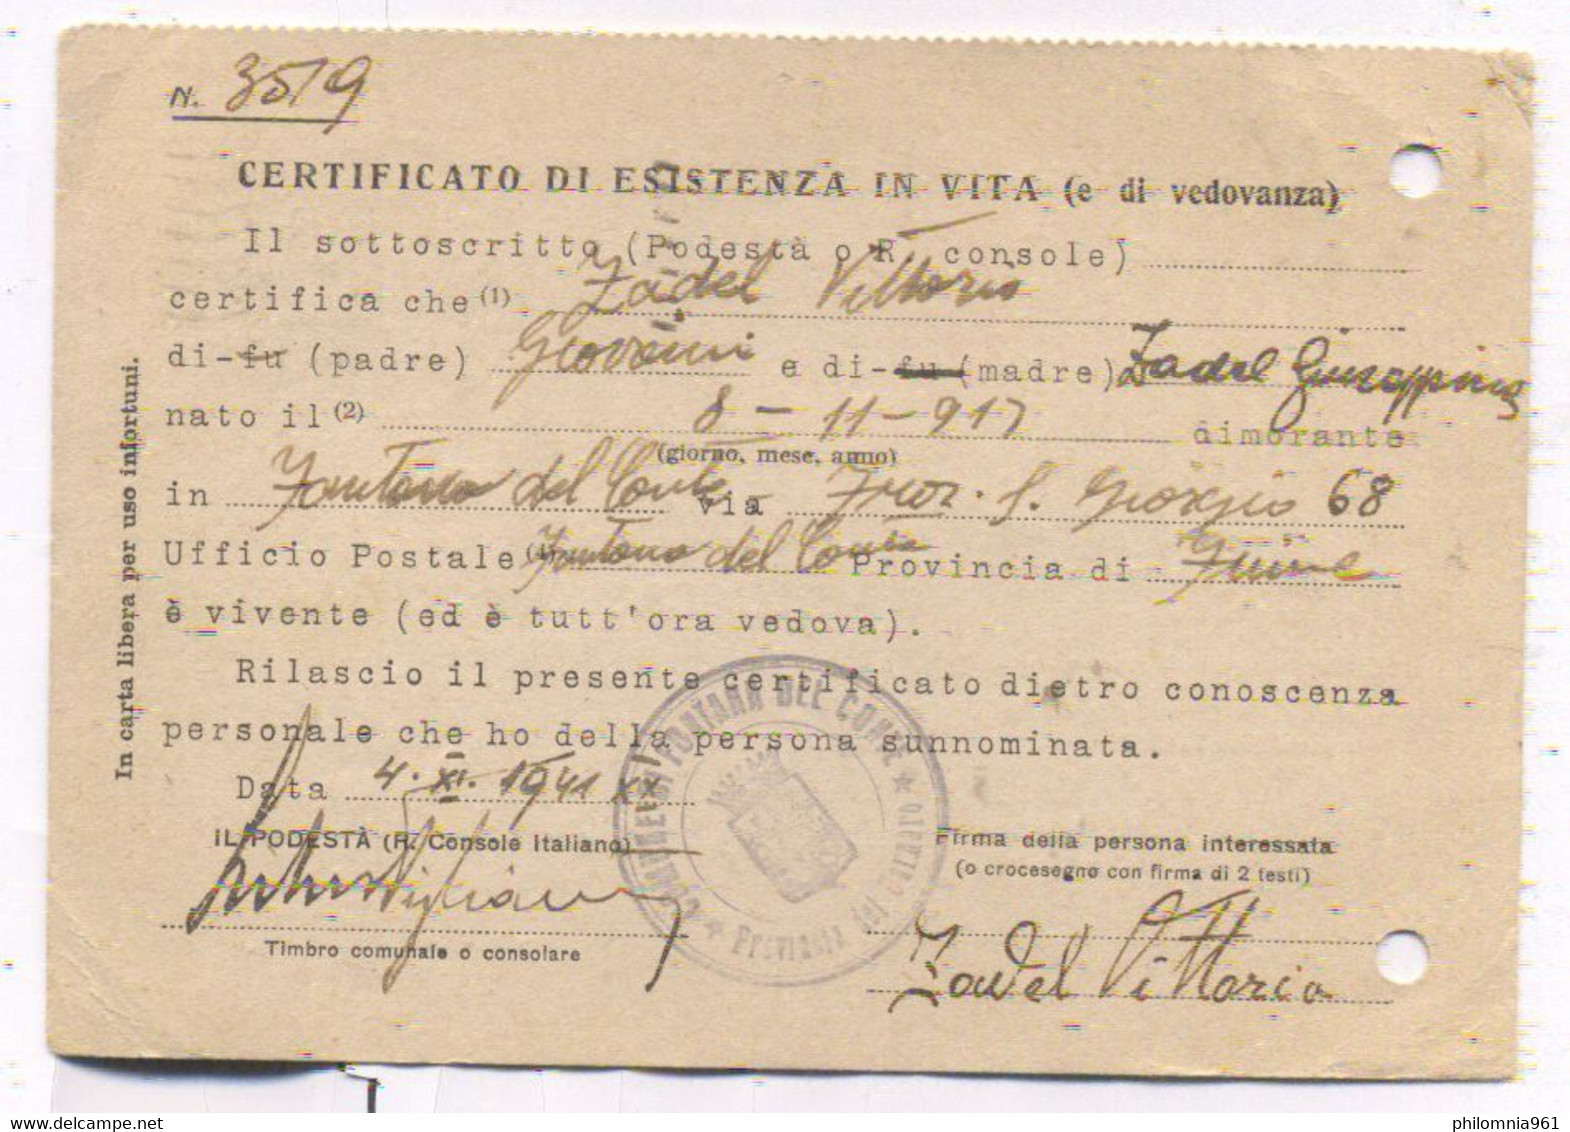 Italy OCCUPATION OF Yugoslavia FIUME POSTAL CARD TO Triest 1941 - Jugoslawische Bes.: Fiume